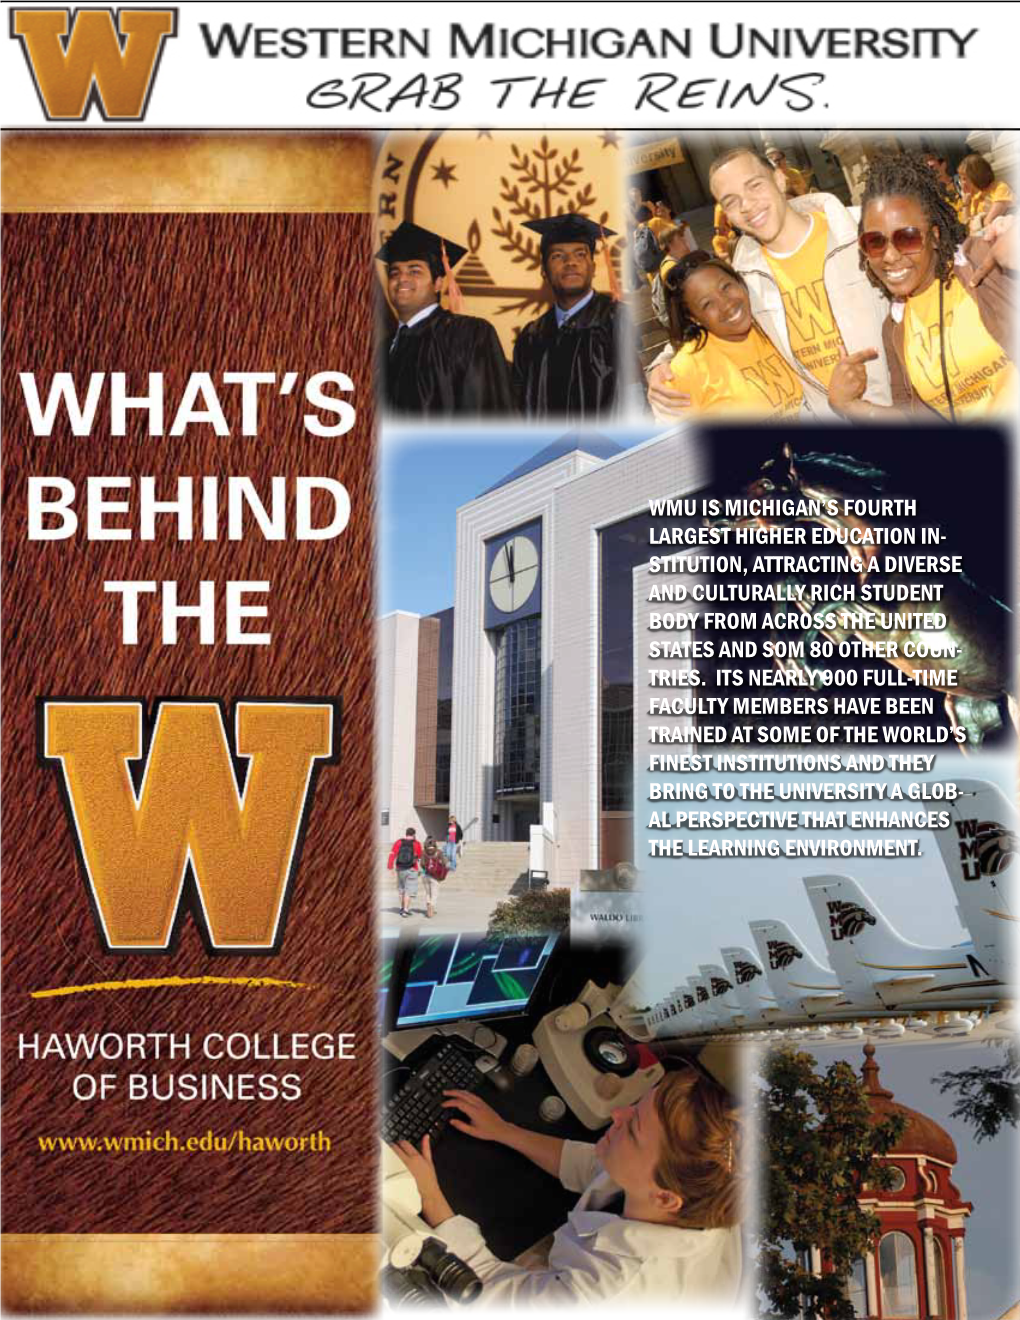 Wmu Is Michigan's Fourth Largest Higher Education In